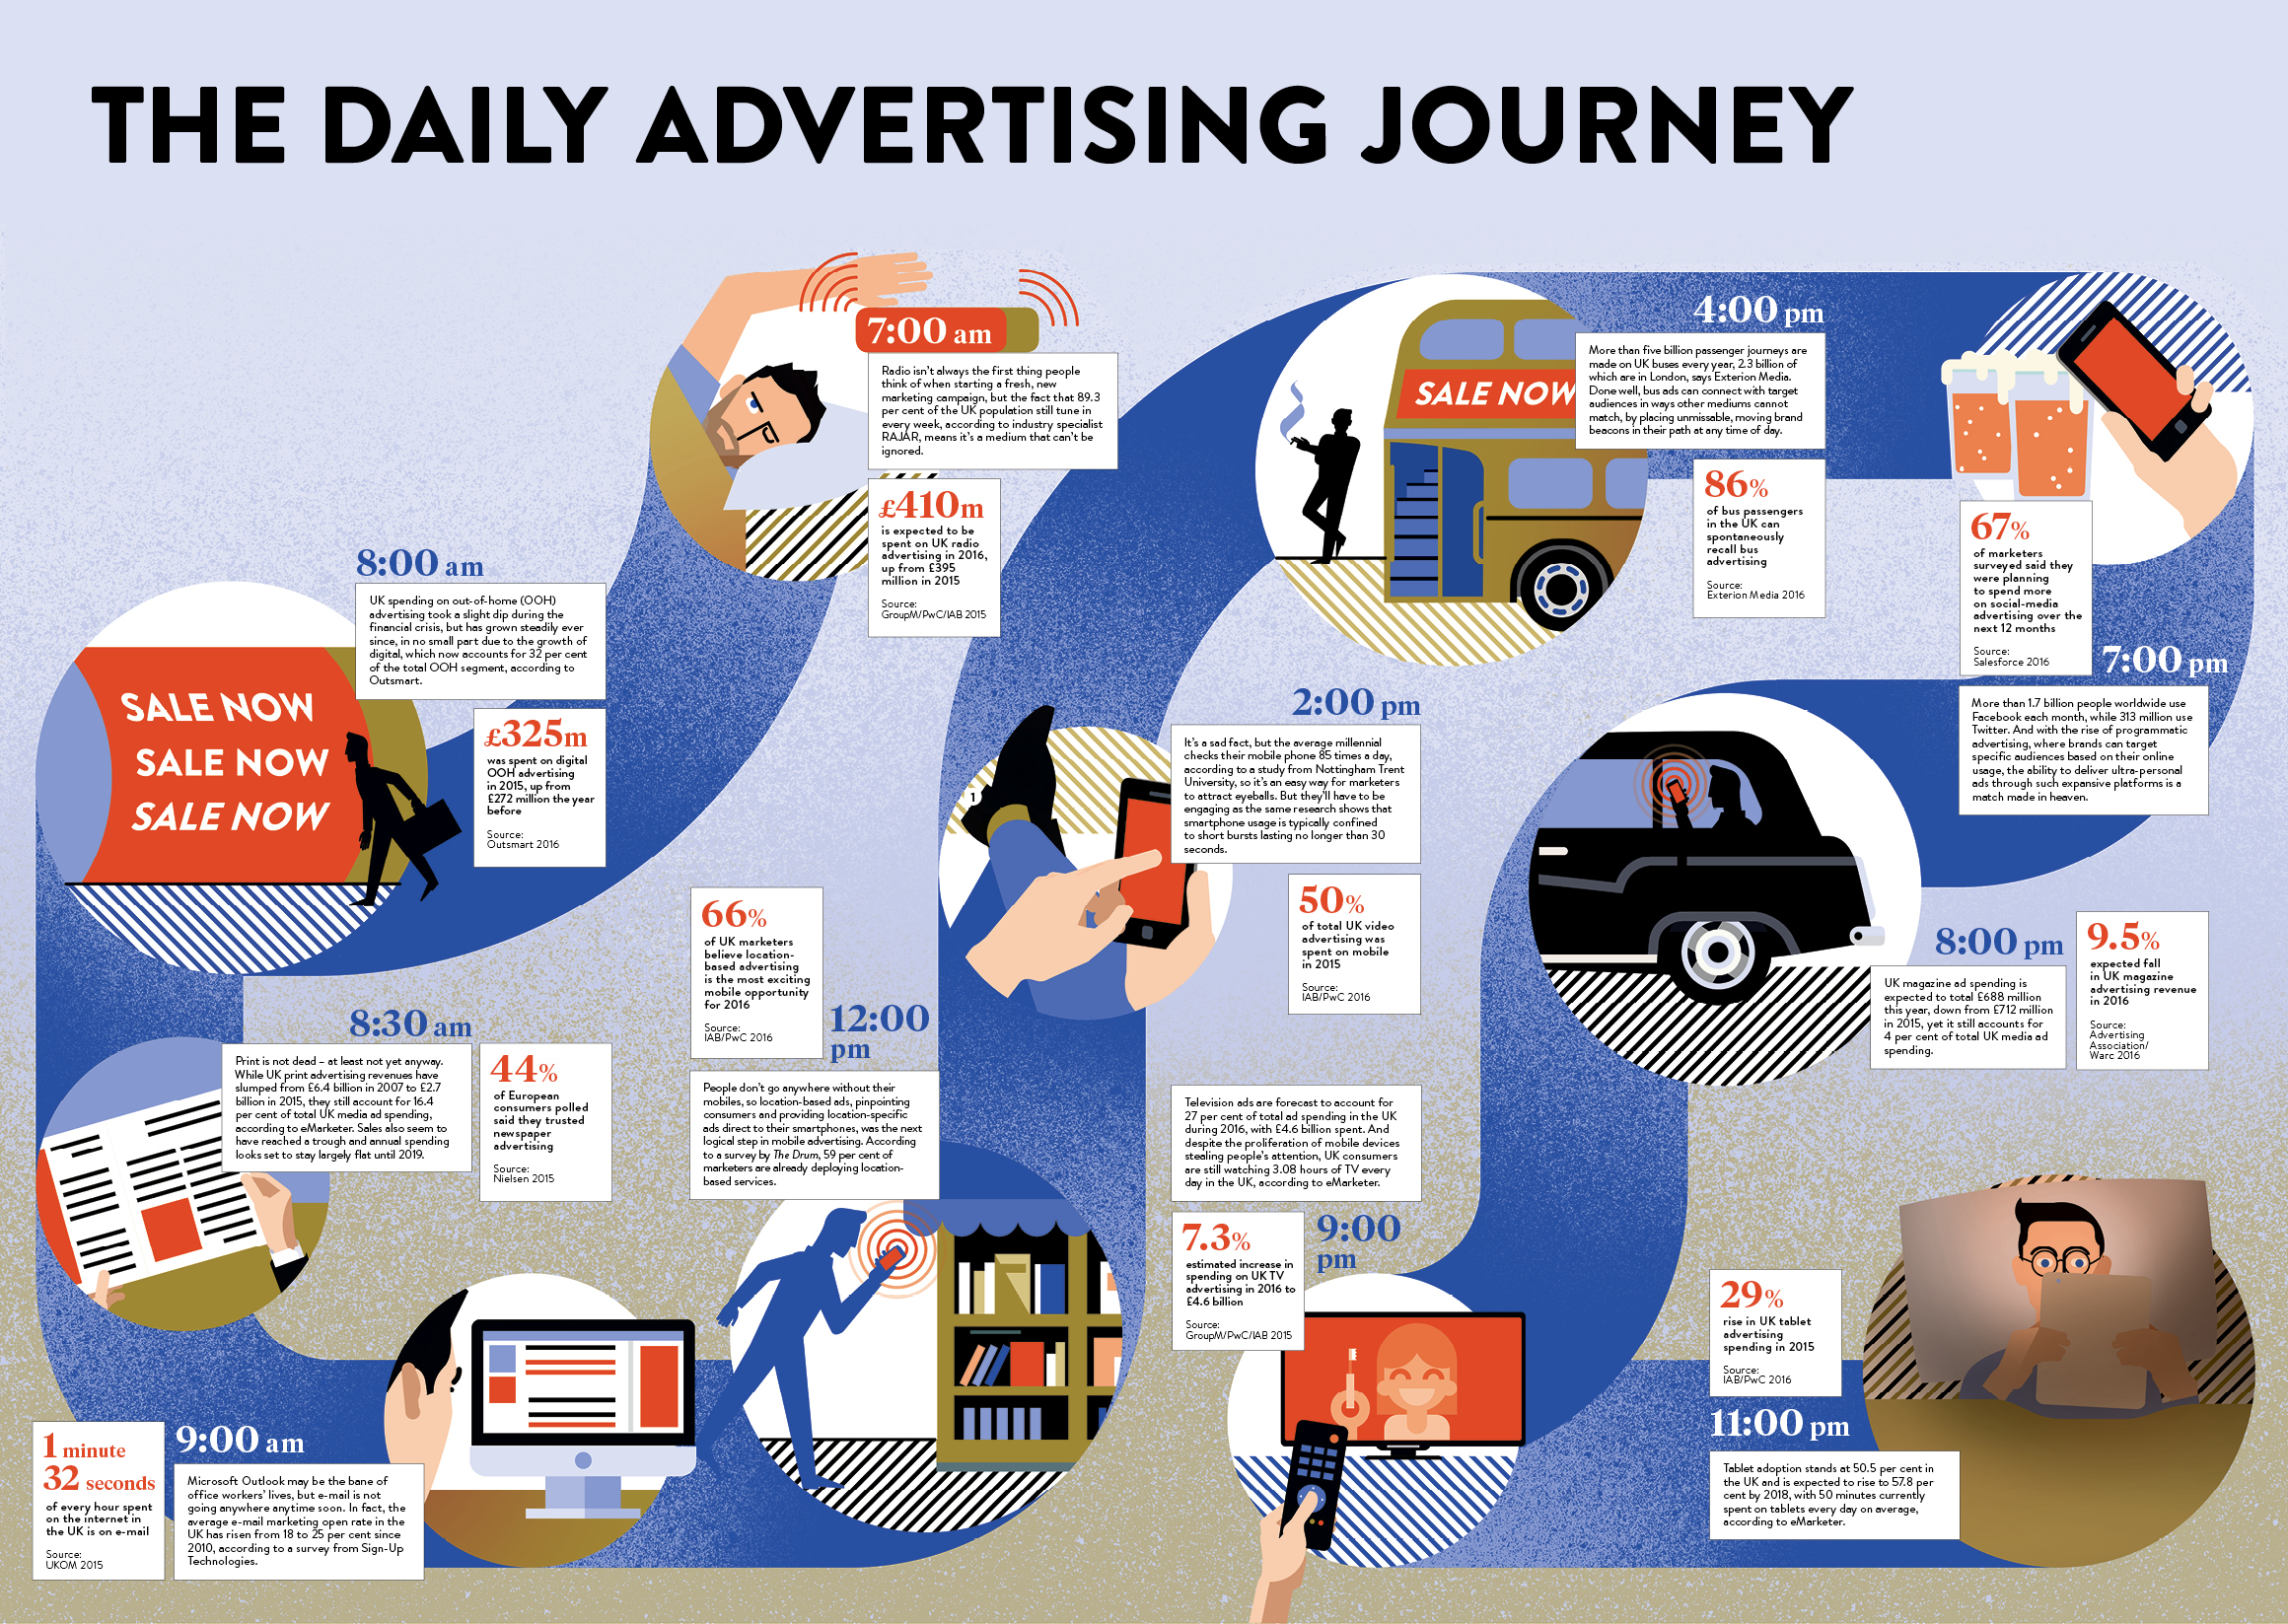 Infographic looking at the daily advertising journey